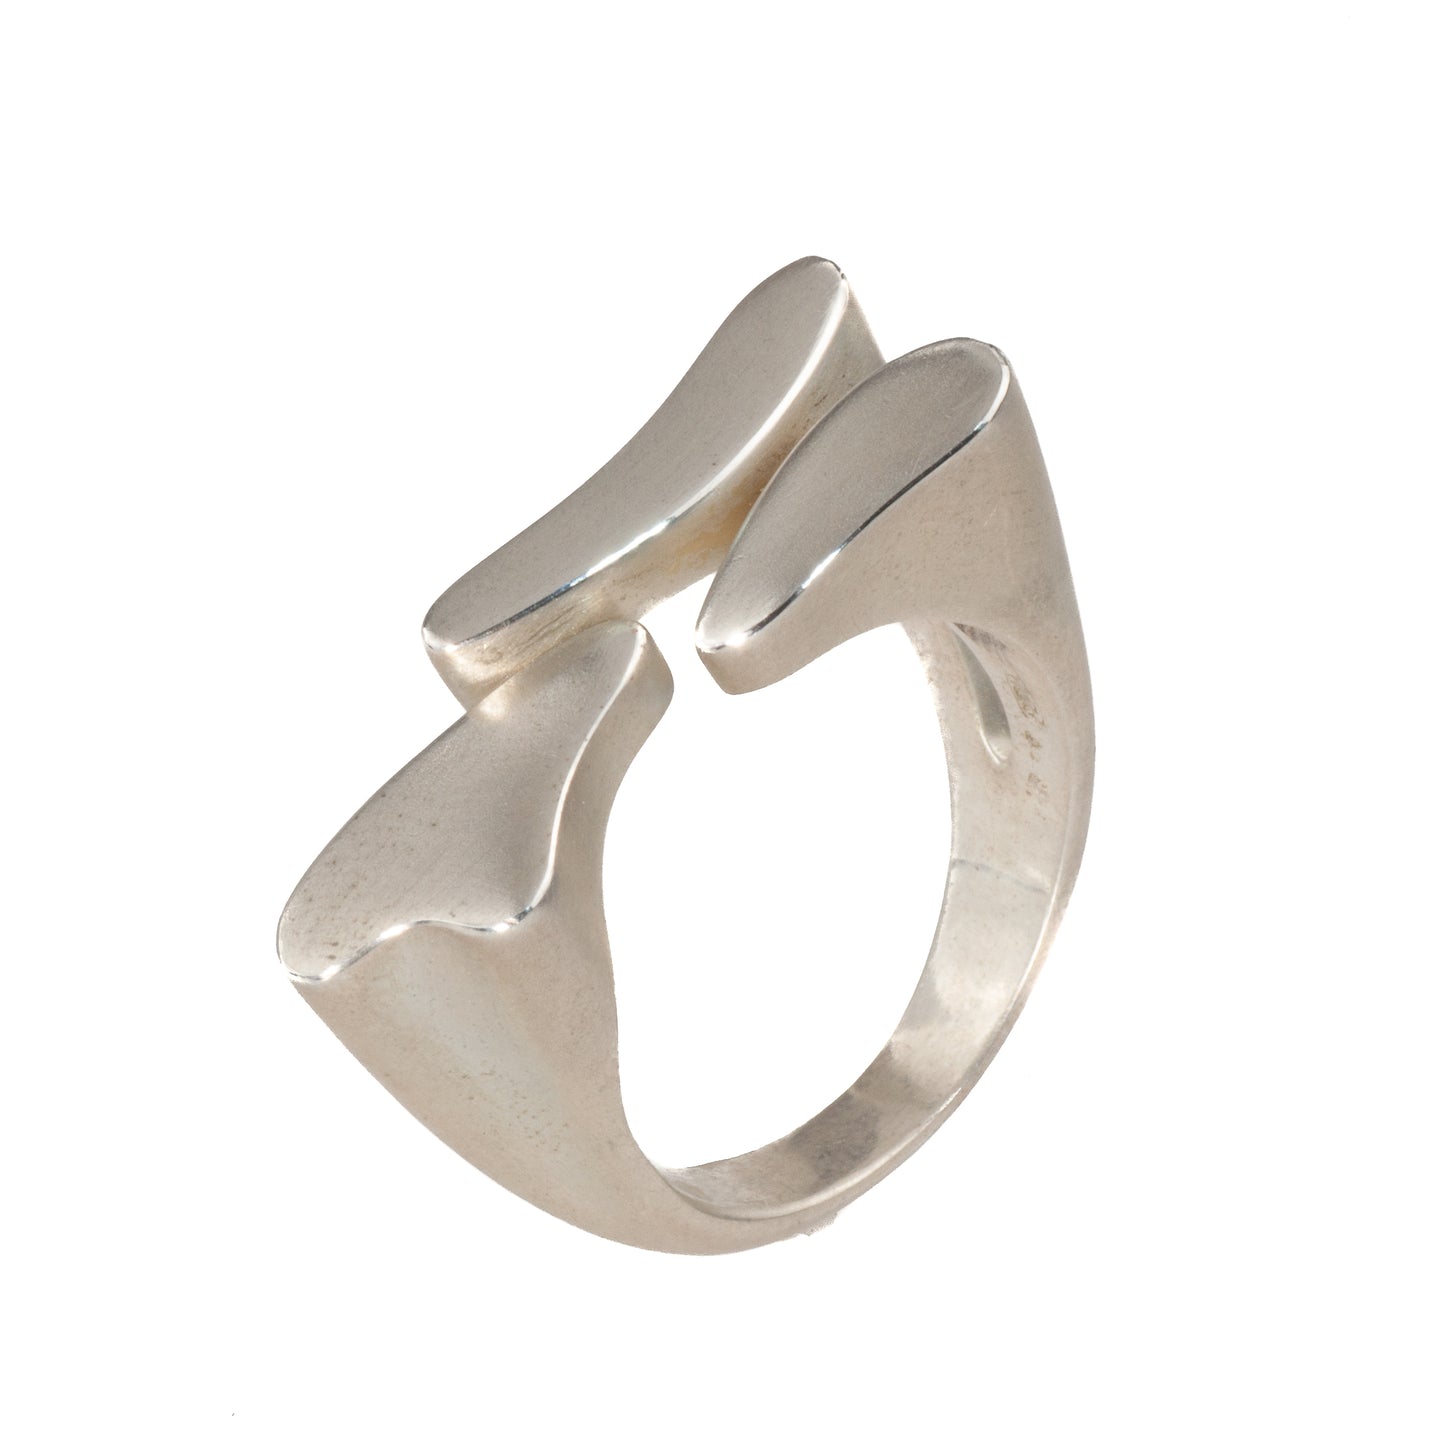 Mysterium Collection "3 Clouds" Ring